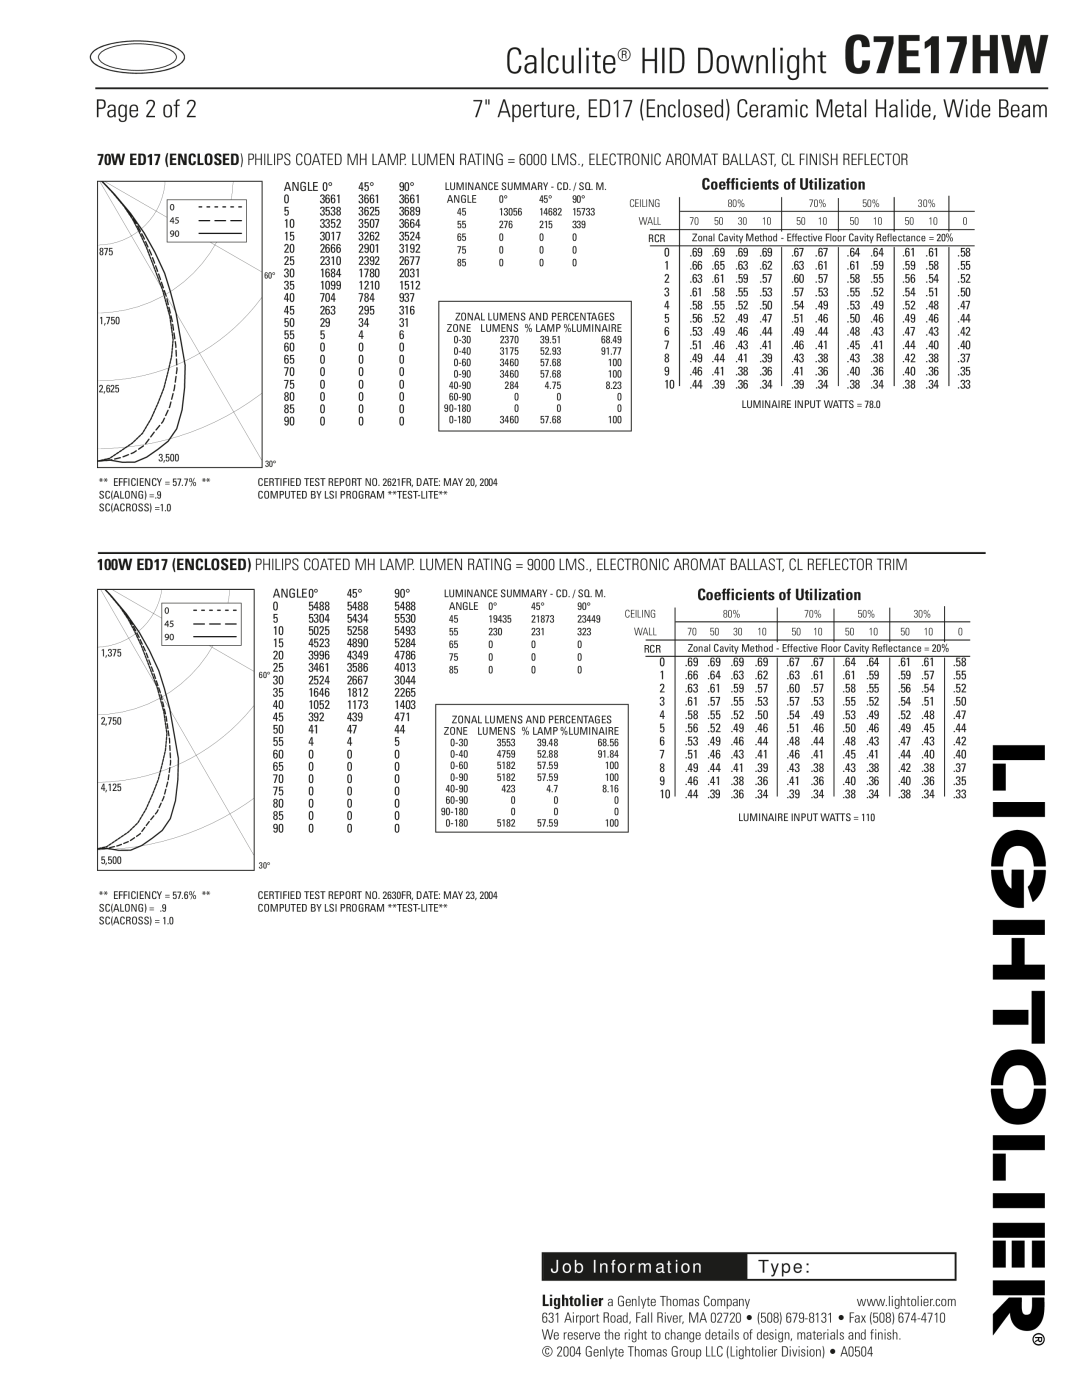 Lightolier specifications Page 2 of, Coefficients of Utilization, Calculite HID Downlight C7E17HW, Job Information, Type 